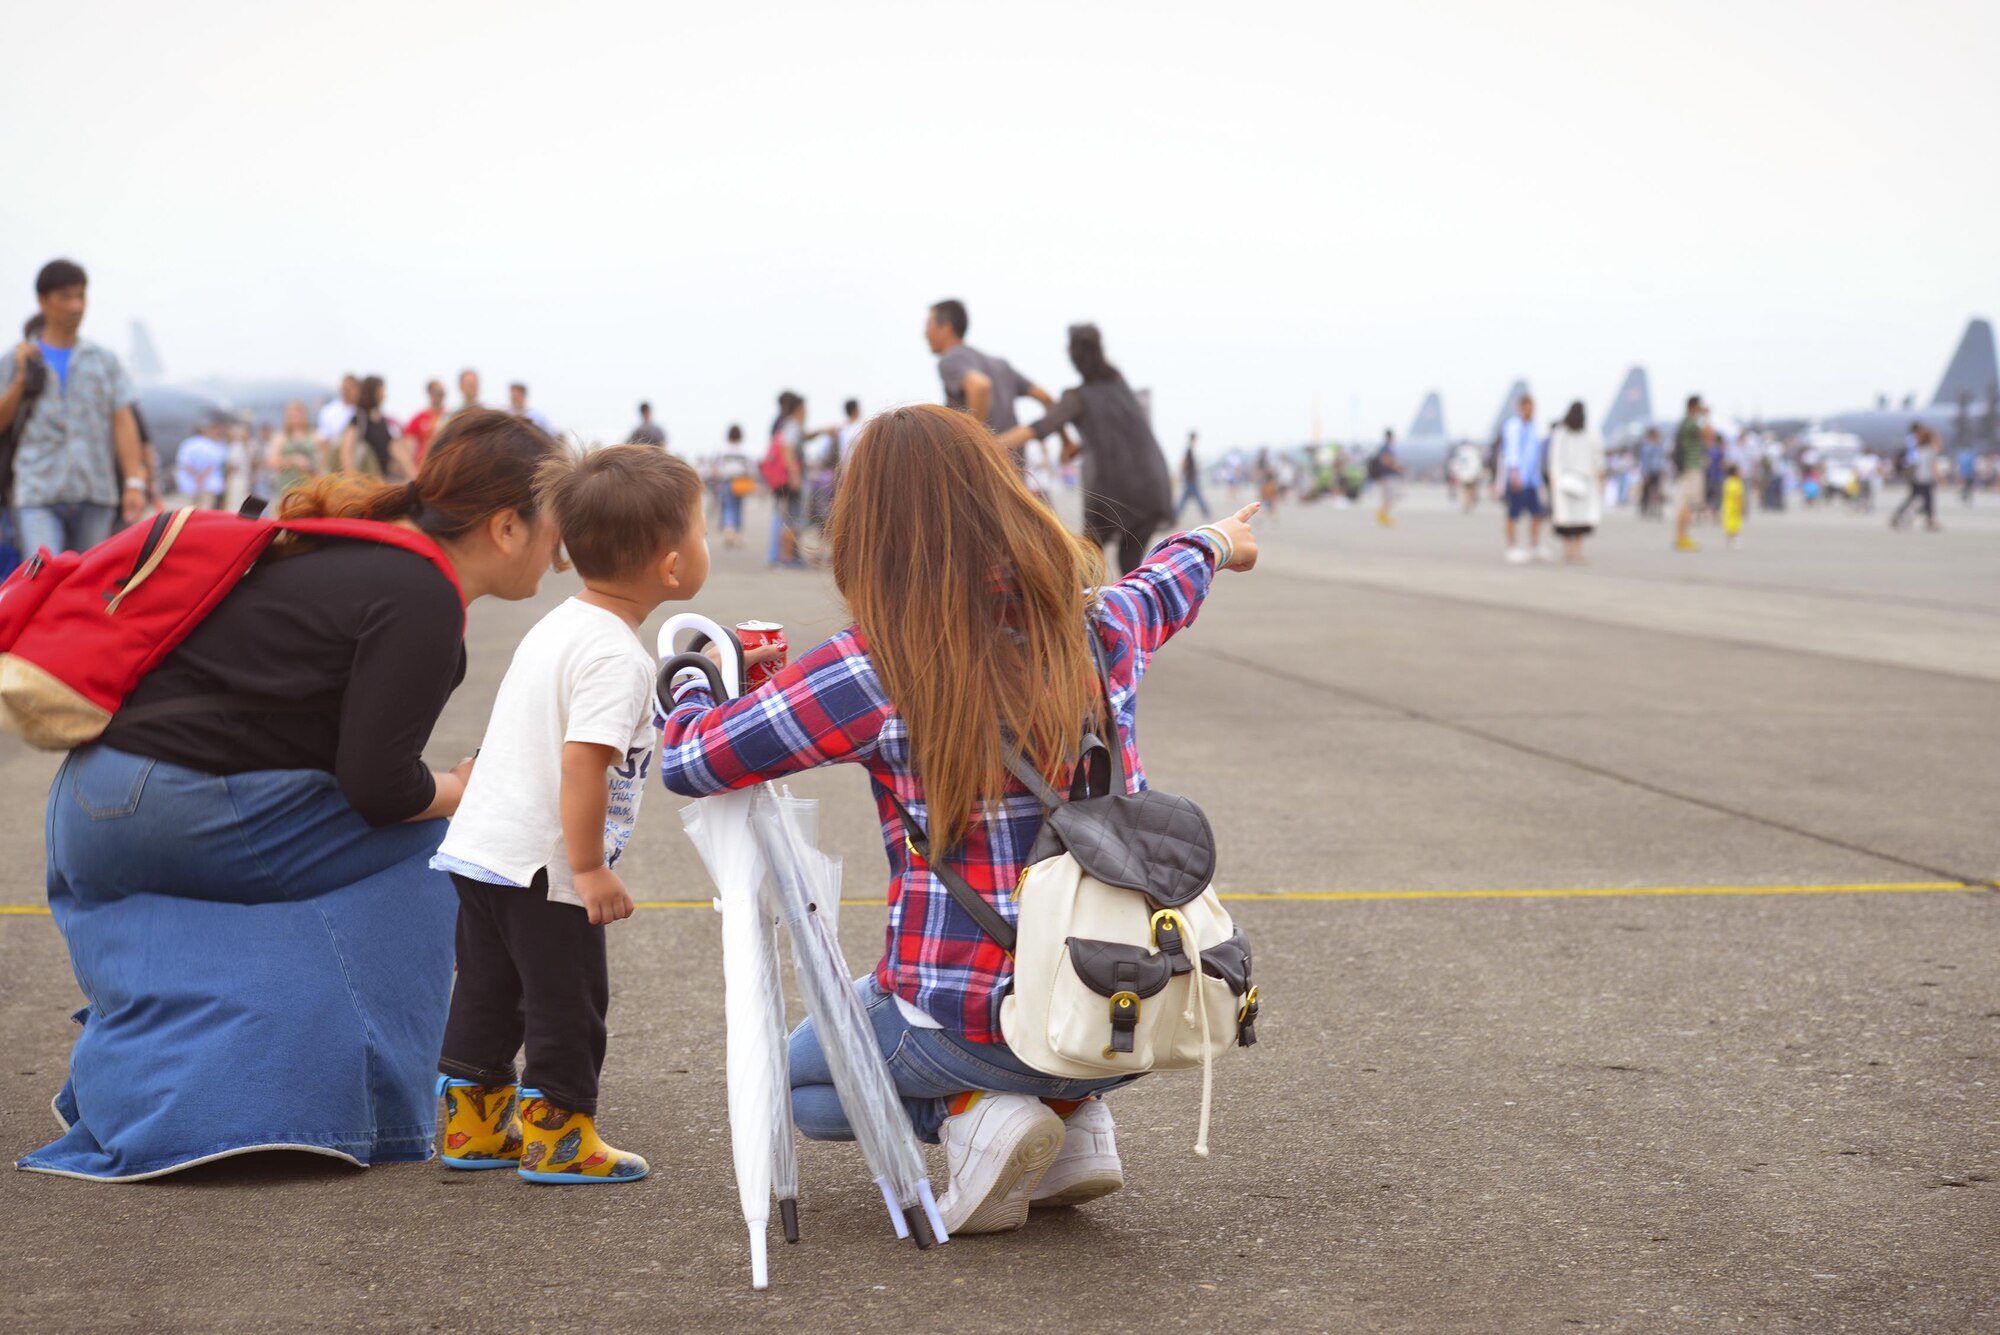 Festivalgoers explore the flight line during the 2016 Japanese-American Friendship Festival at Yokota Air Base, Japan, Sept. 17, 2016. The festival gives community members a chance to come onto Yokota to see static aircraft, witness military demonstrations, learn about the capabilities and training done at Yokota and to meet with the US and Japan Self-Defense Force members who work and live here. (U.S. Air Force photo by Airman 1st Class Elizabeth Baker/Released)